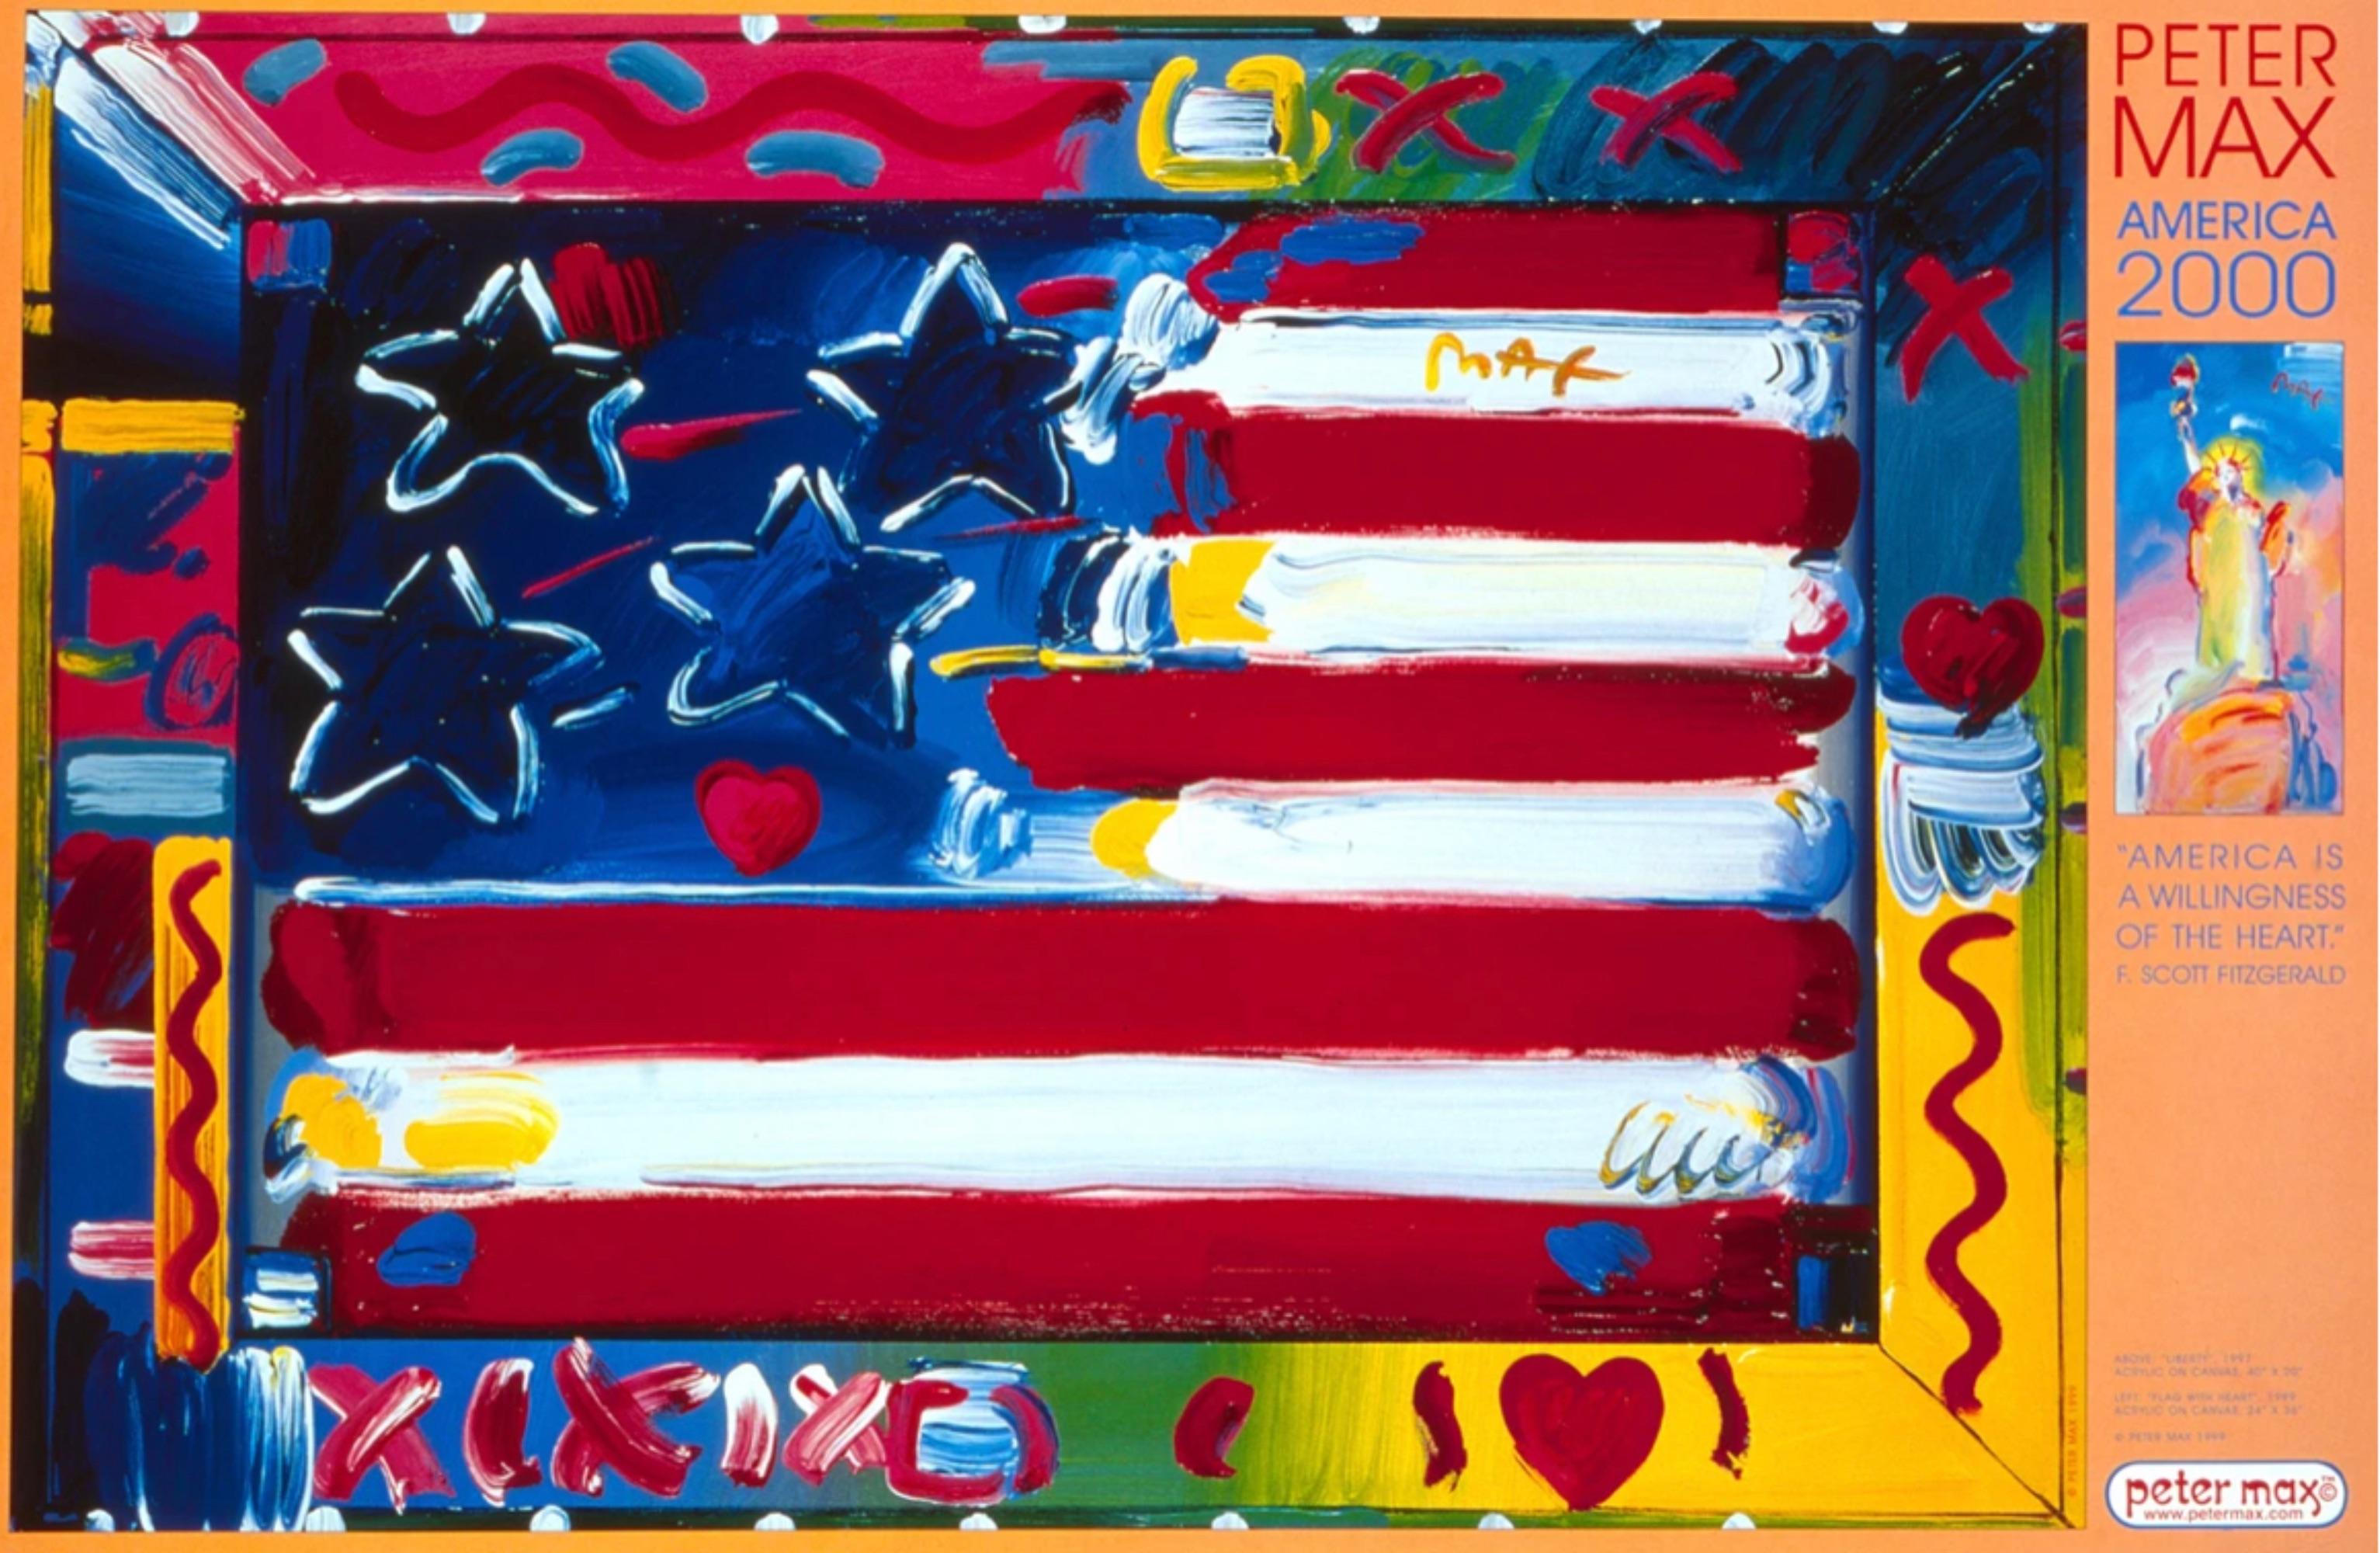 Artist: Peter Max (1937)
Title: America 2000
Year: 1999
Medium: Offset lithograph on premium paper
Size: 24 x 36 inches
Condition: Excellent
Inscription: Signed by the artist.
Notes: Published by Via Max. Sold signed by the artist and dedicated to